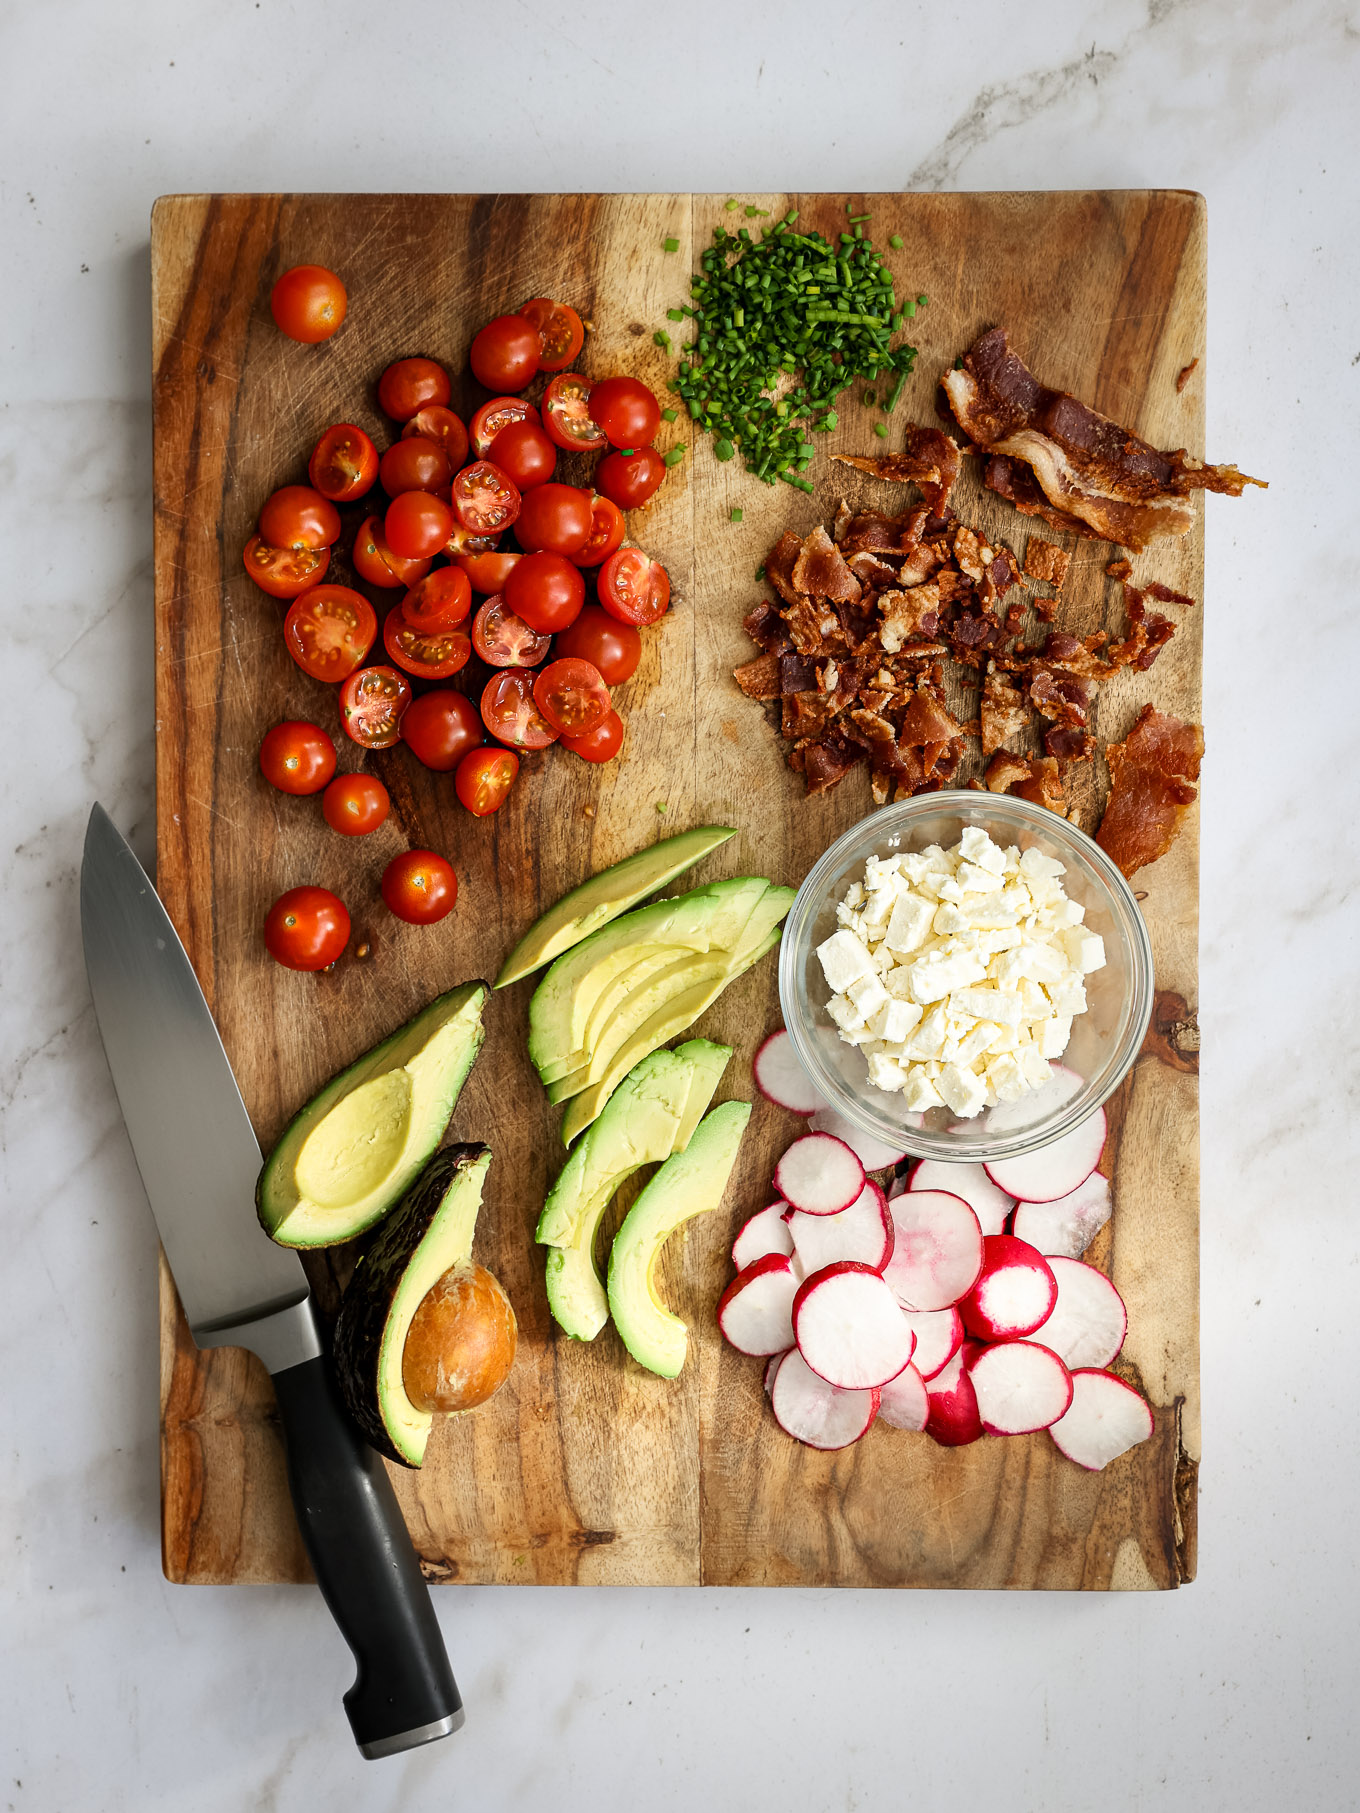 sliced tomatoes, avocado, radishes, bacon, chives, and crumbled feta on a wooden board.